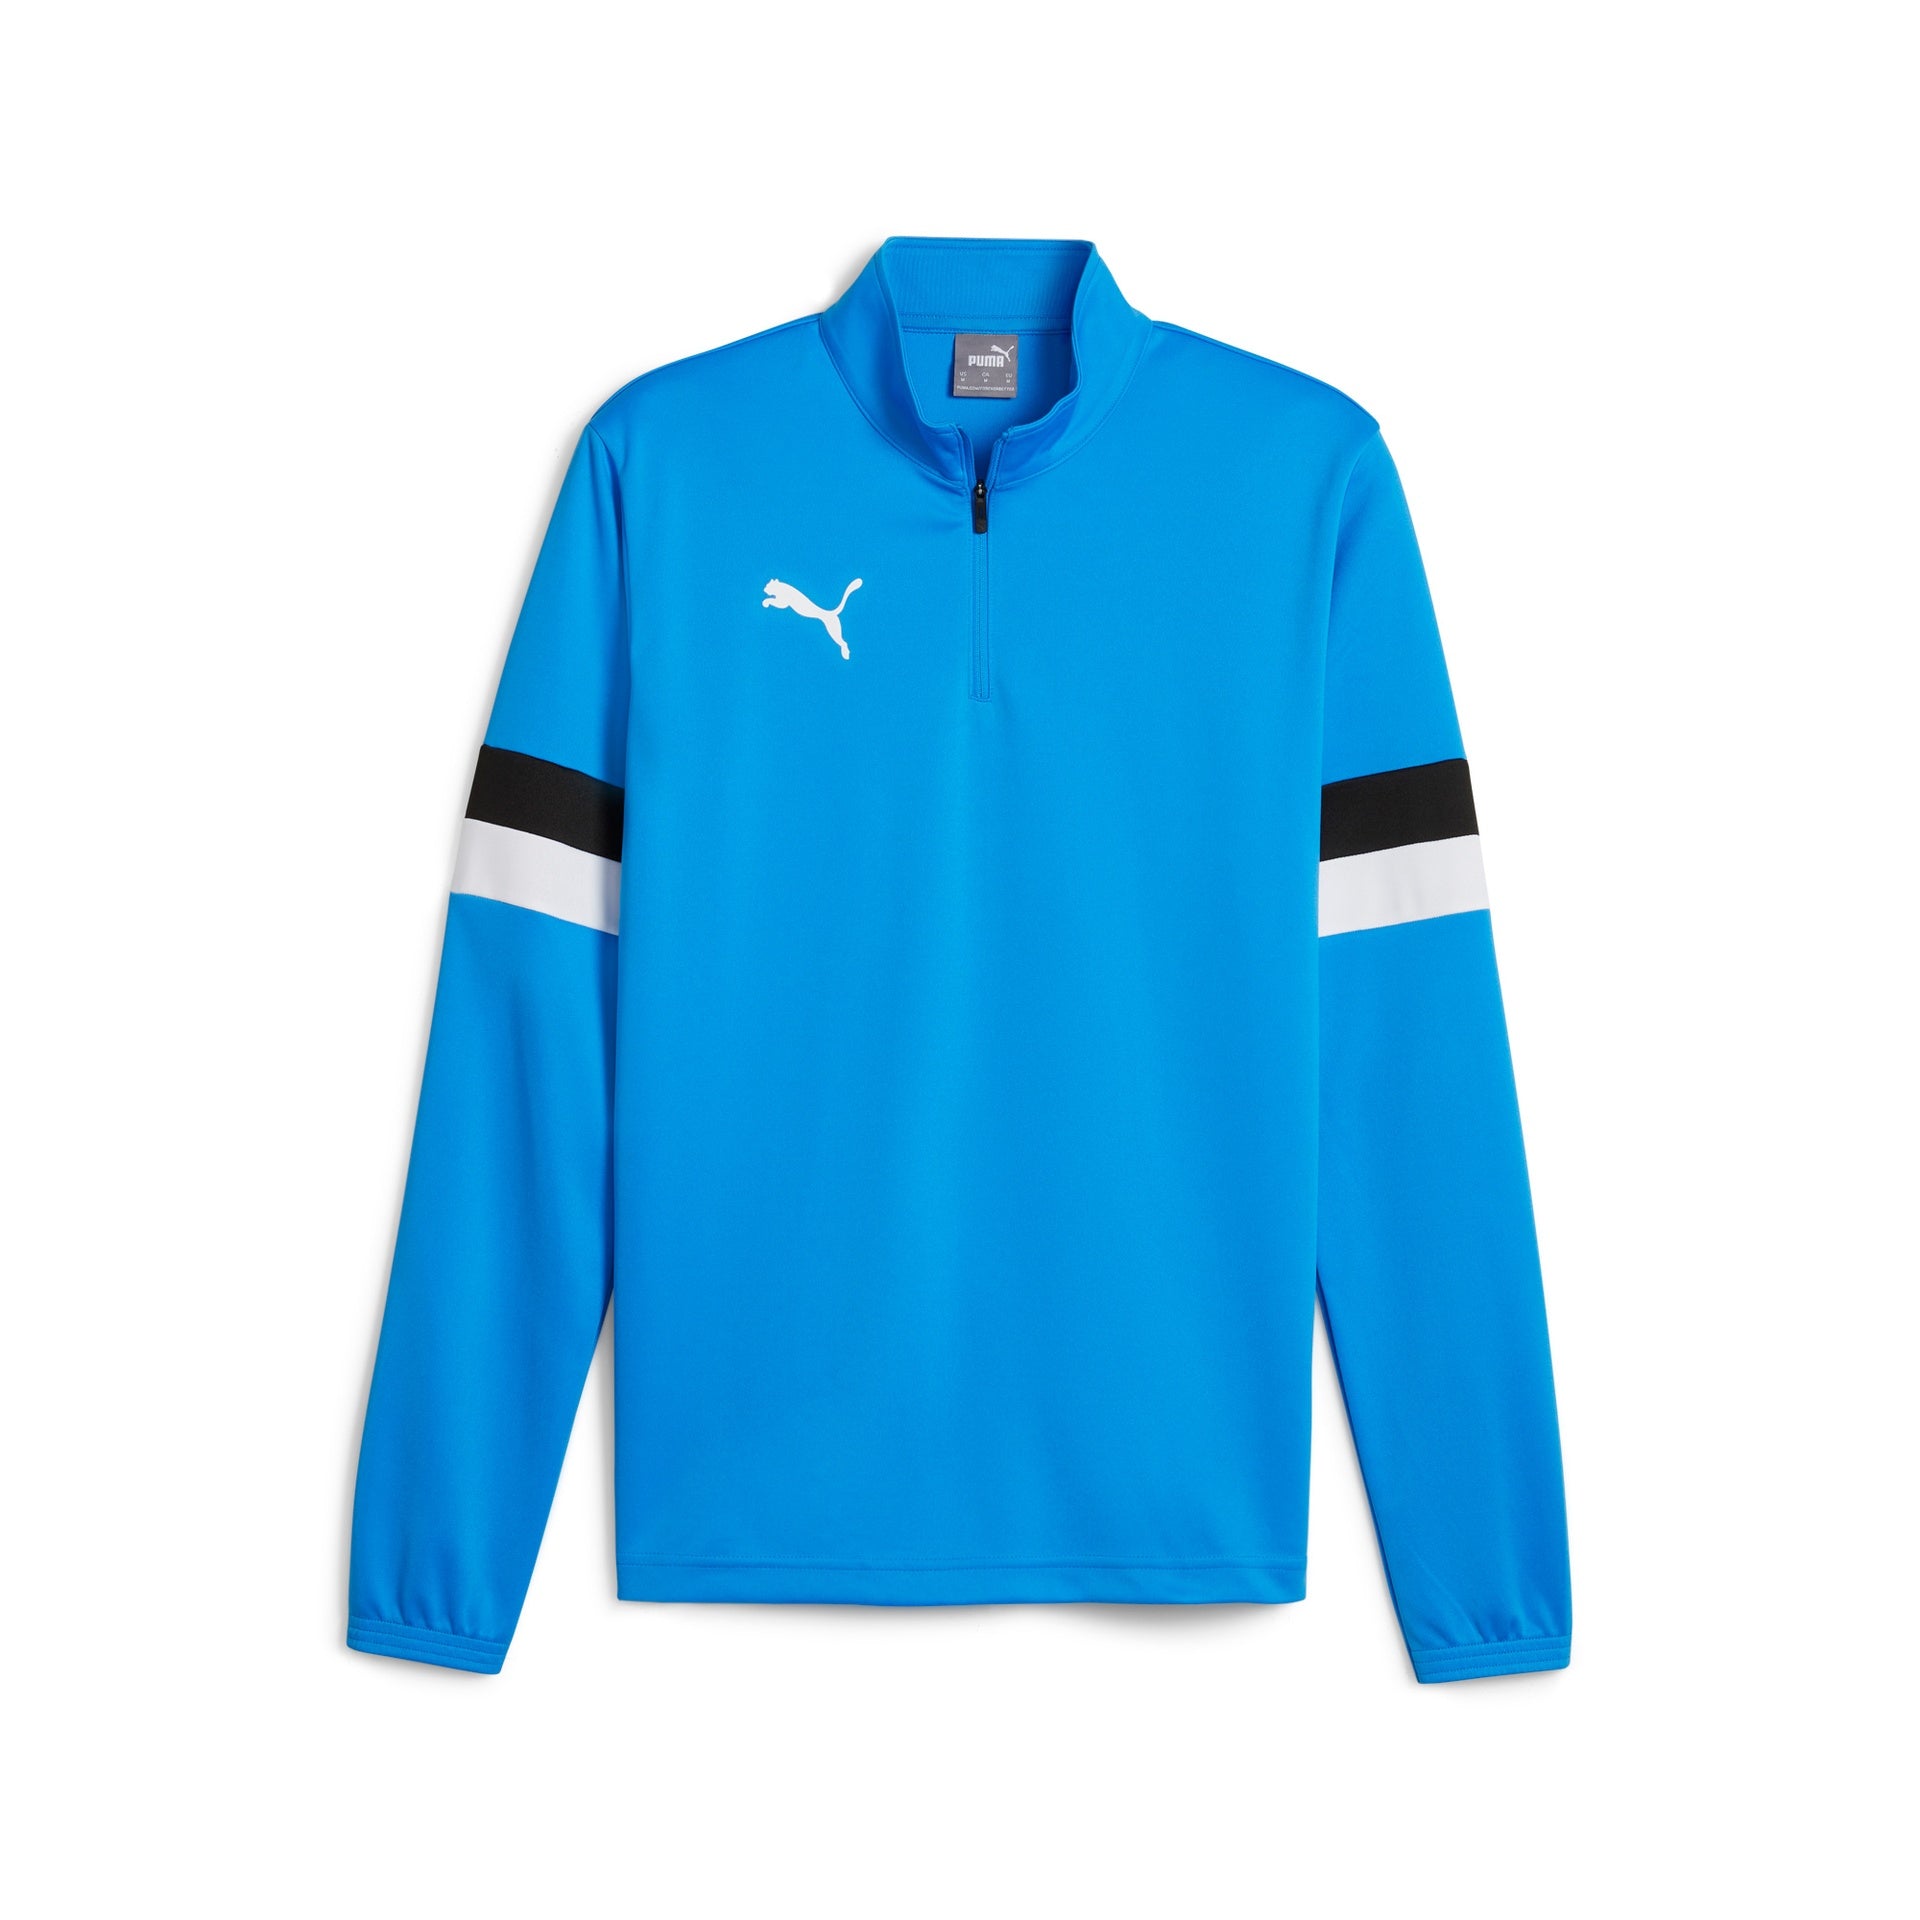 Puma teamRise 1/4 Zip Top  Blue or Black All Sizes